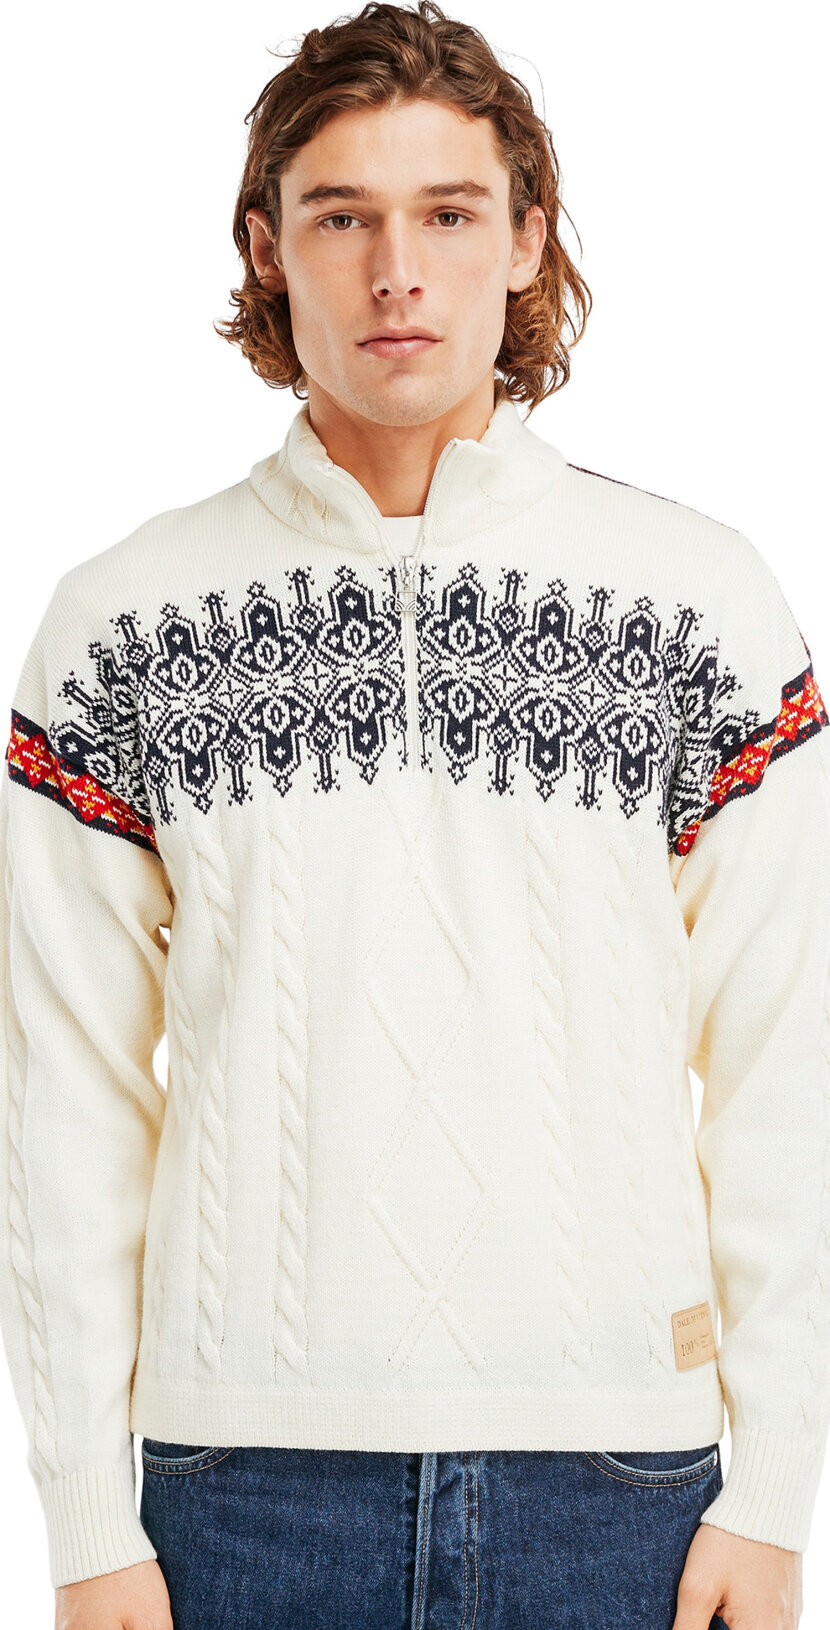 Aspøy Mens Sweater - by 199,90 Norway - € COLDSEASON.com, of White Dale